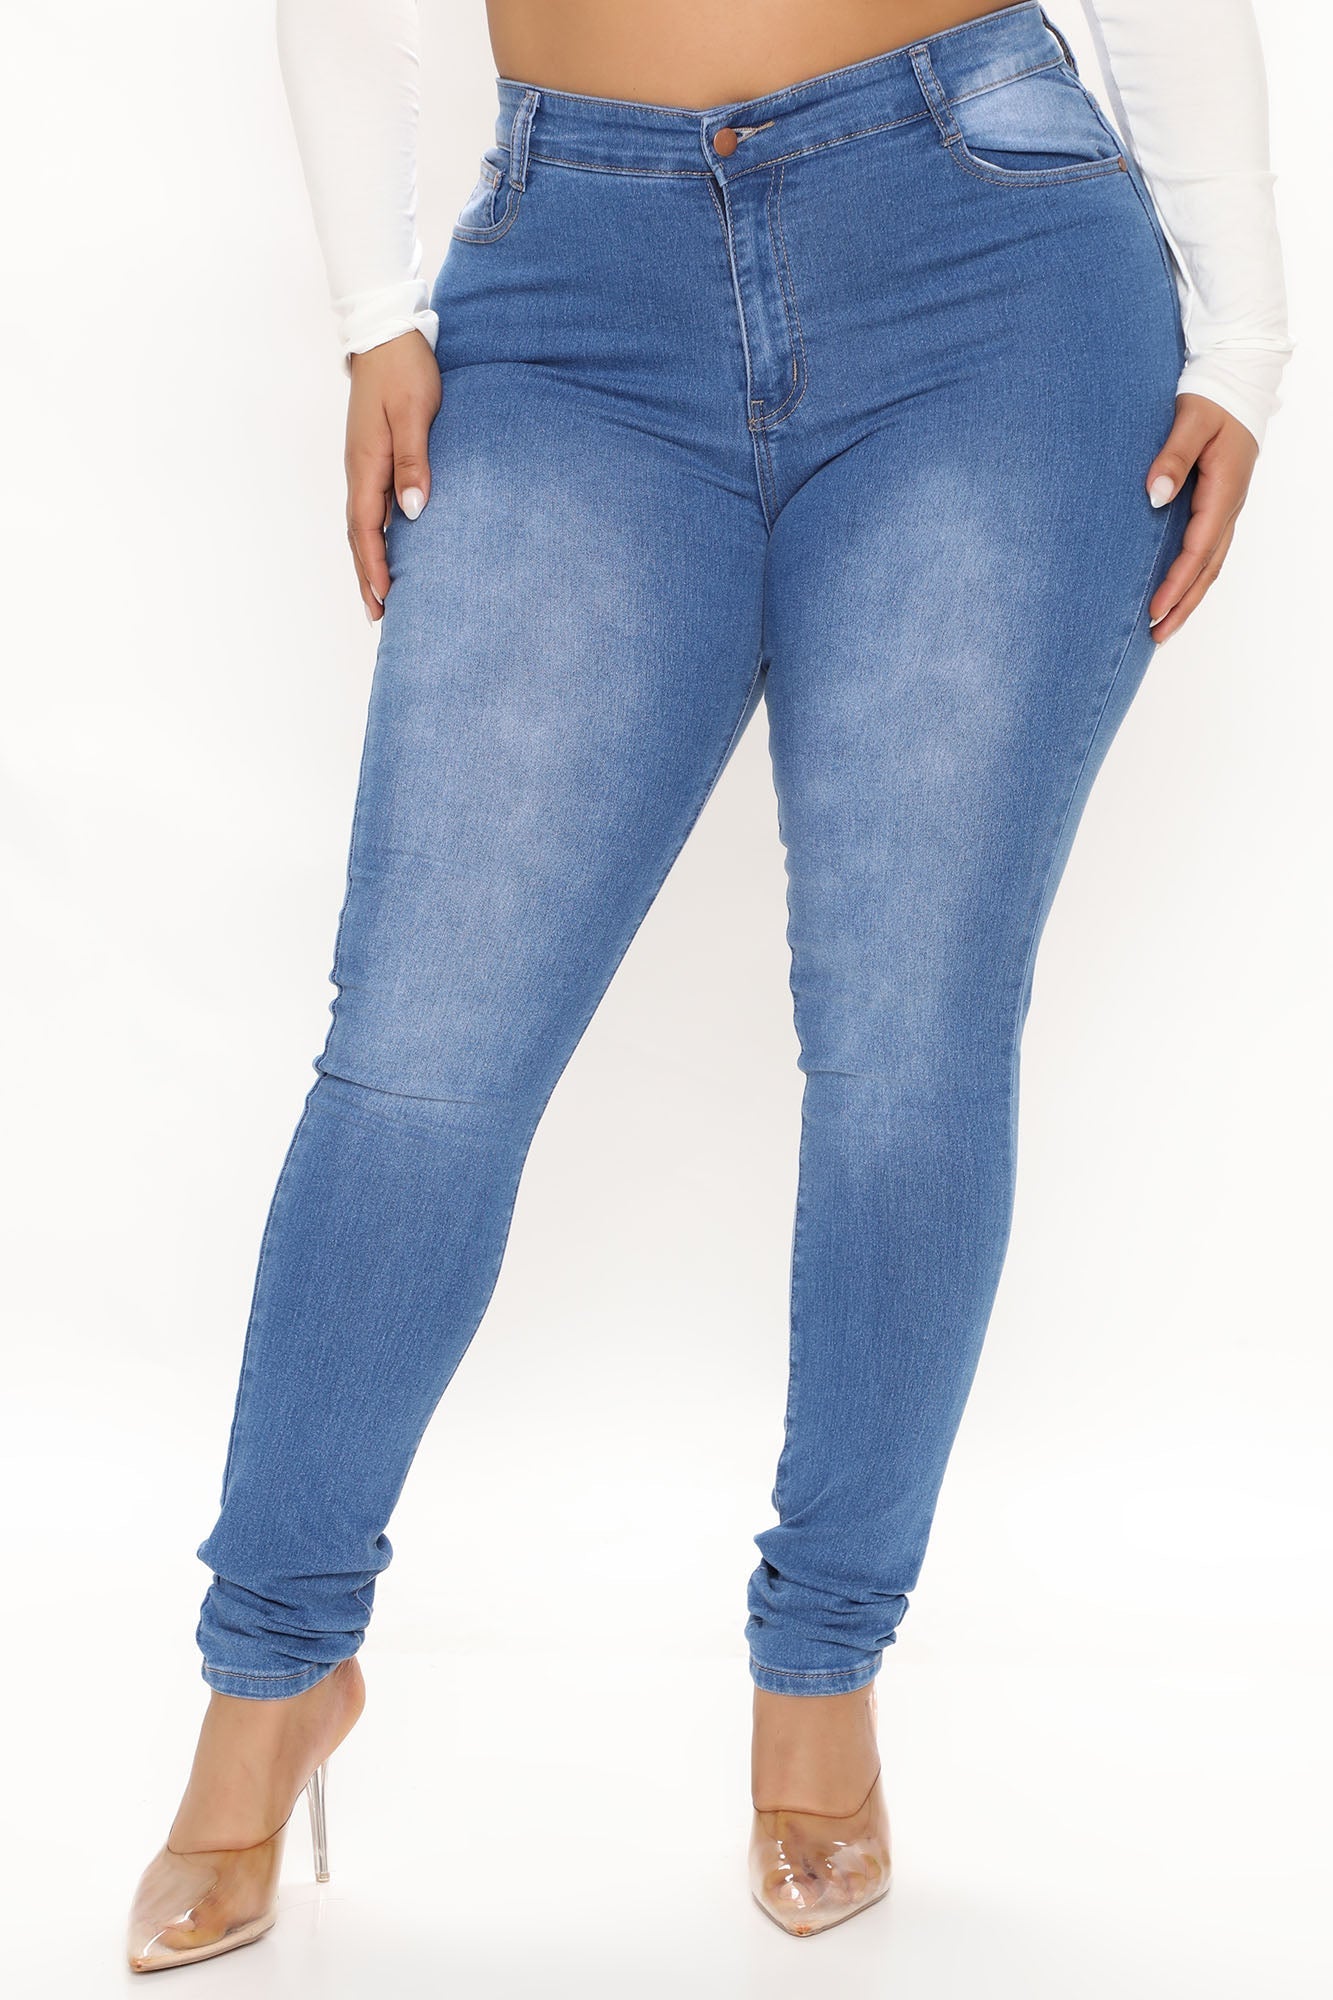 Tall All The Booty Ripped Skinny Jeans - Medium Blue Wash